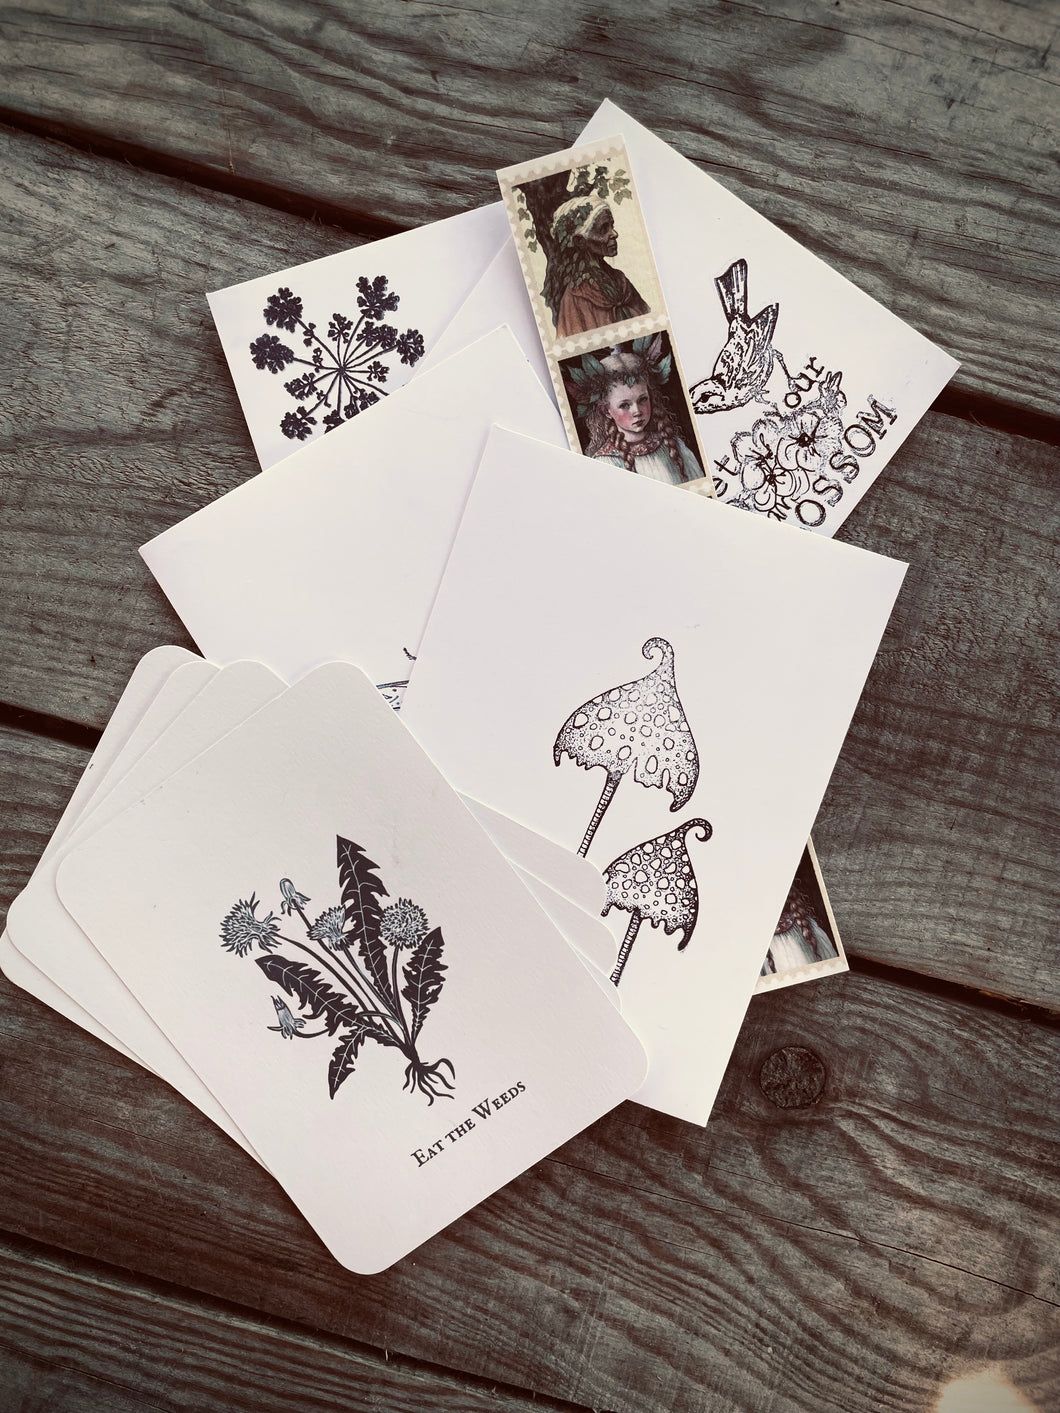 Foggy Bummers Magickal Postcard Collection Set of Four Mini Prints with Decorative Stamped Envelopes 